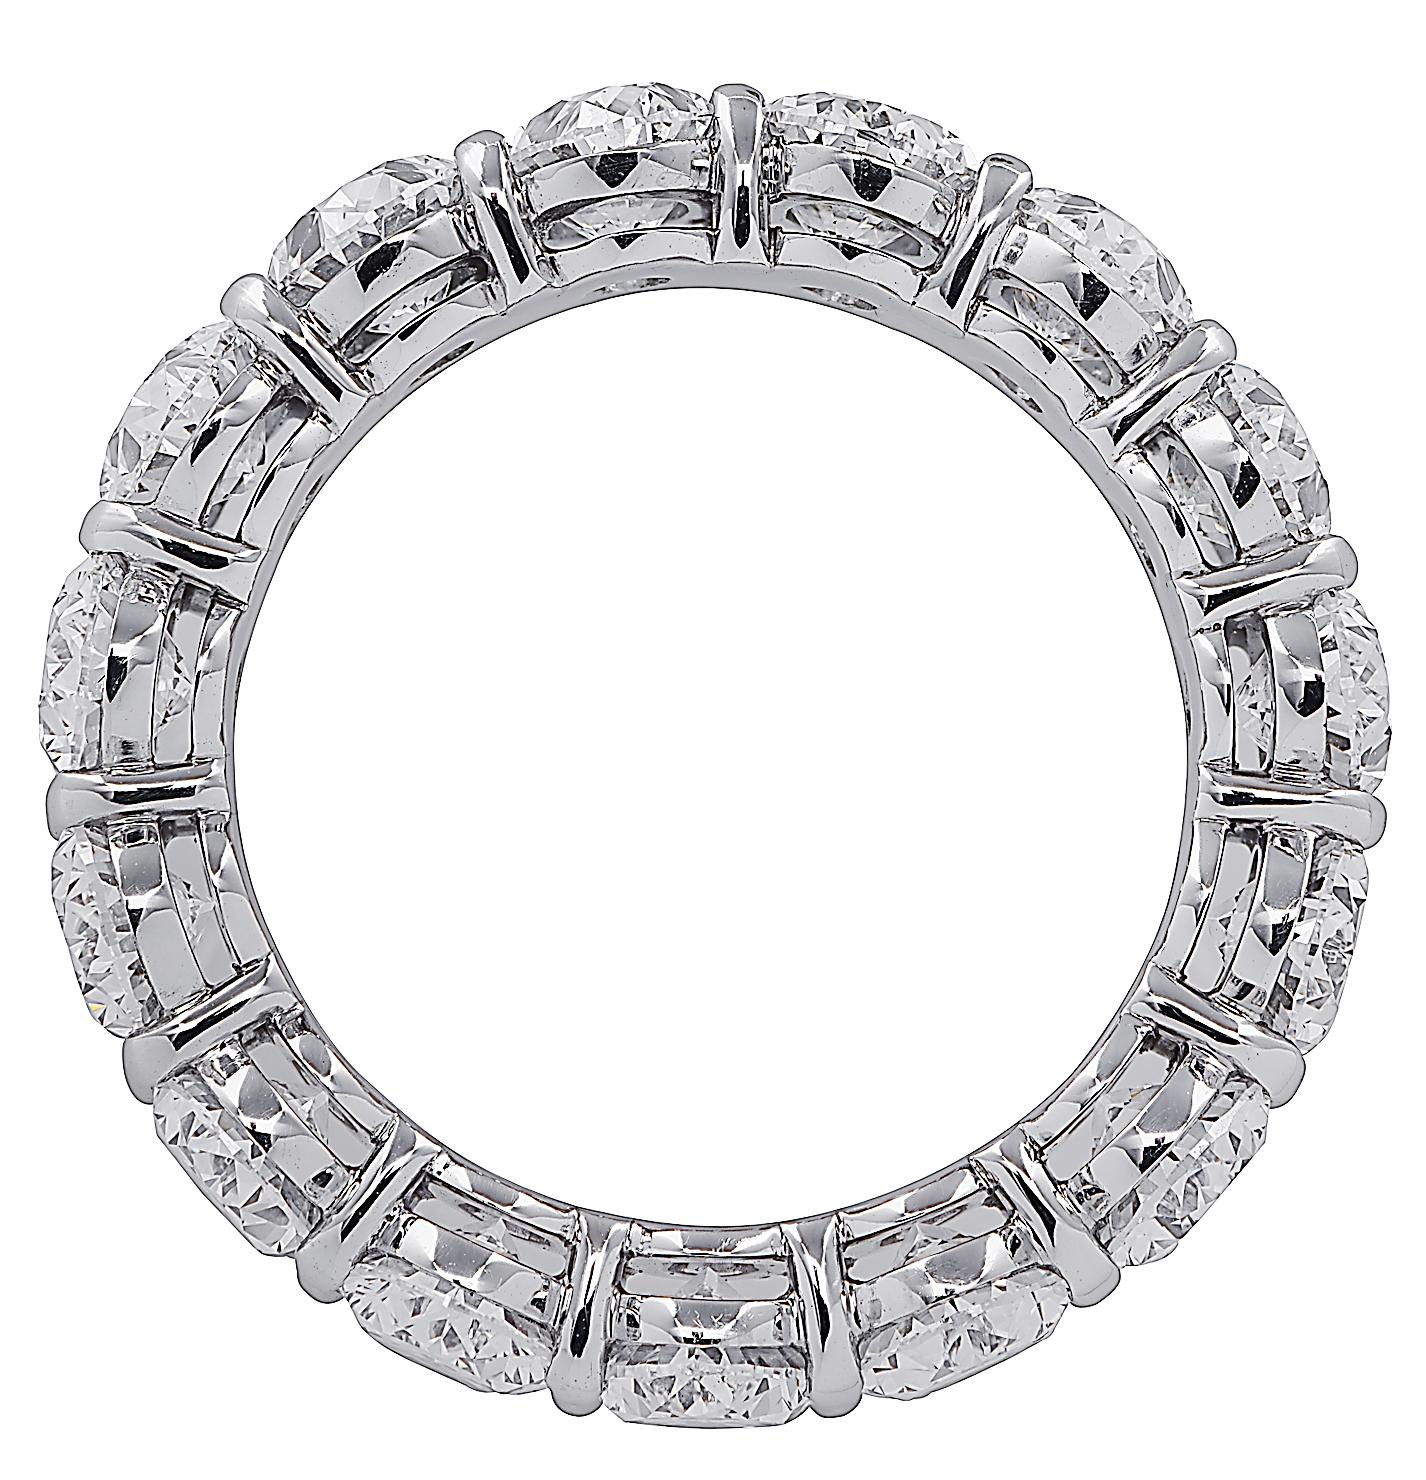 Exquisite eternity band crafted by hand in Platinum, showcasing 15 stunning GIA Certified oval cut diamonds weighing 7.90 carats total, D-F color, VVS1-VS2 clarity. Each diamond is carefully selected, perfectly matched and set in a seamless sea of